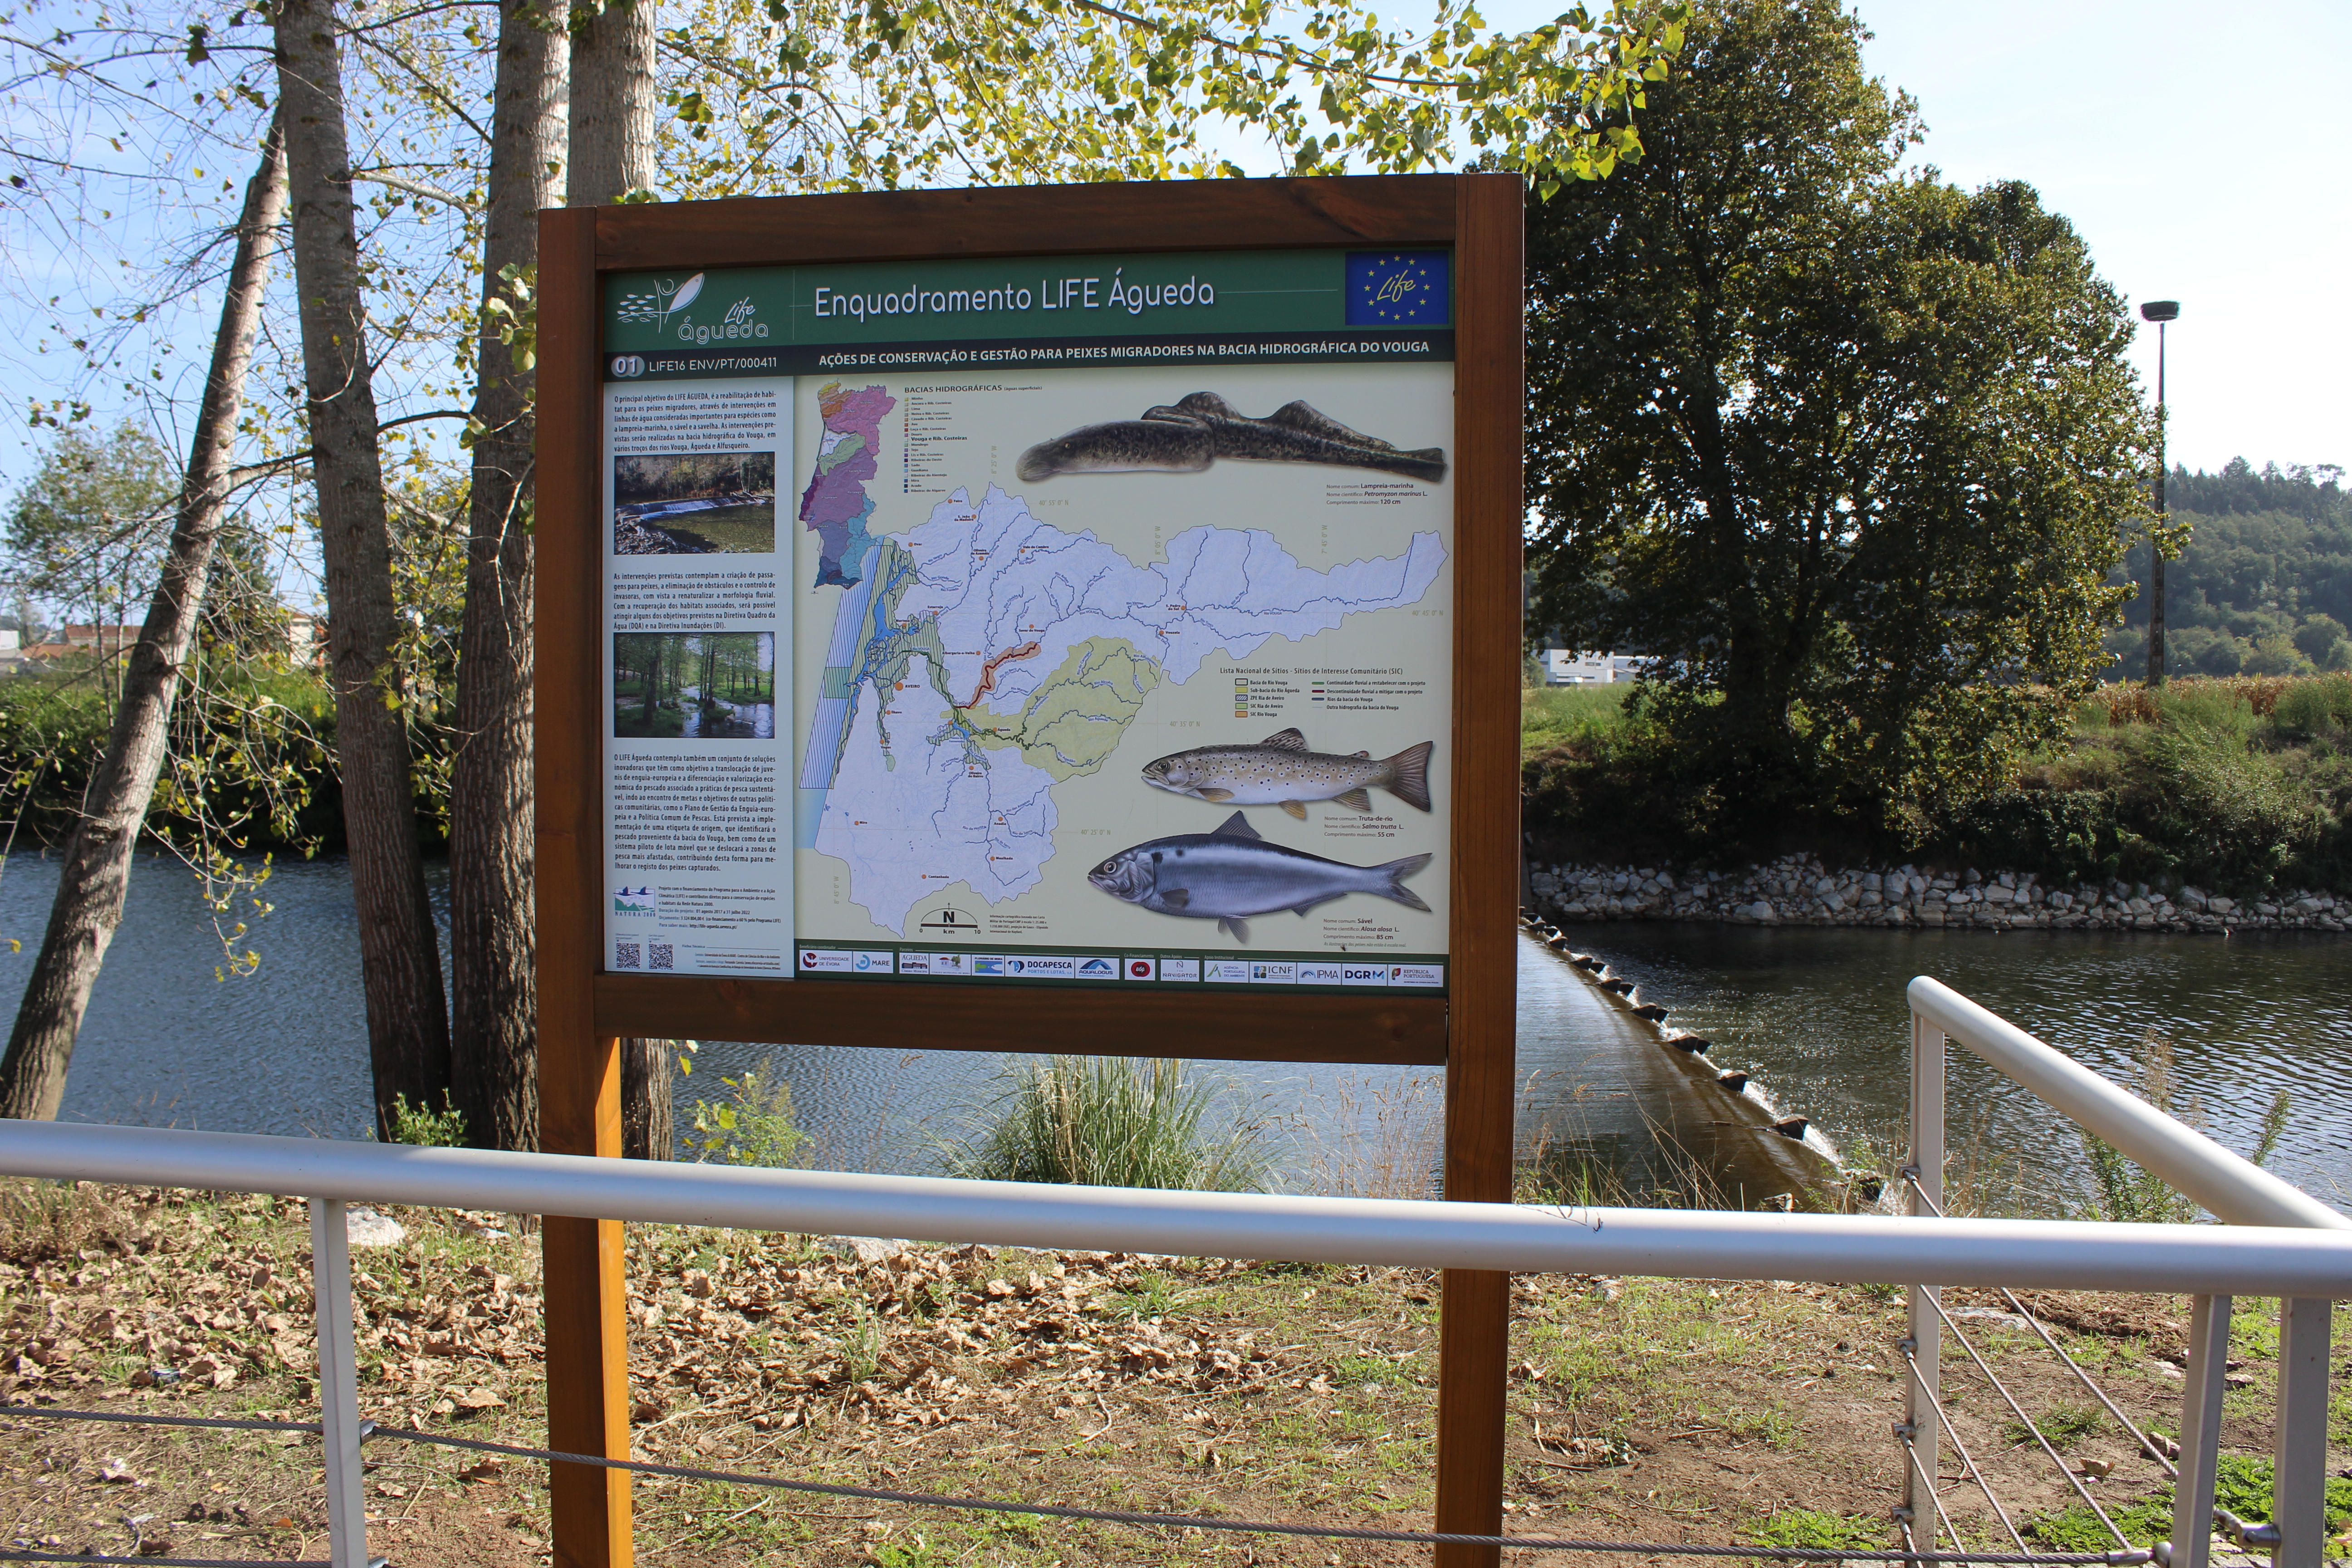 LIFE AGUEDA – up and down the river, getting to know the Vouga’s river basin migratory fish